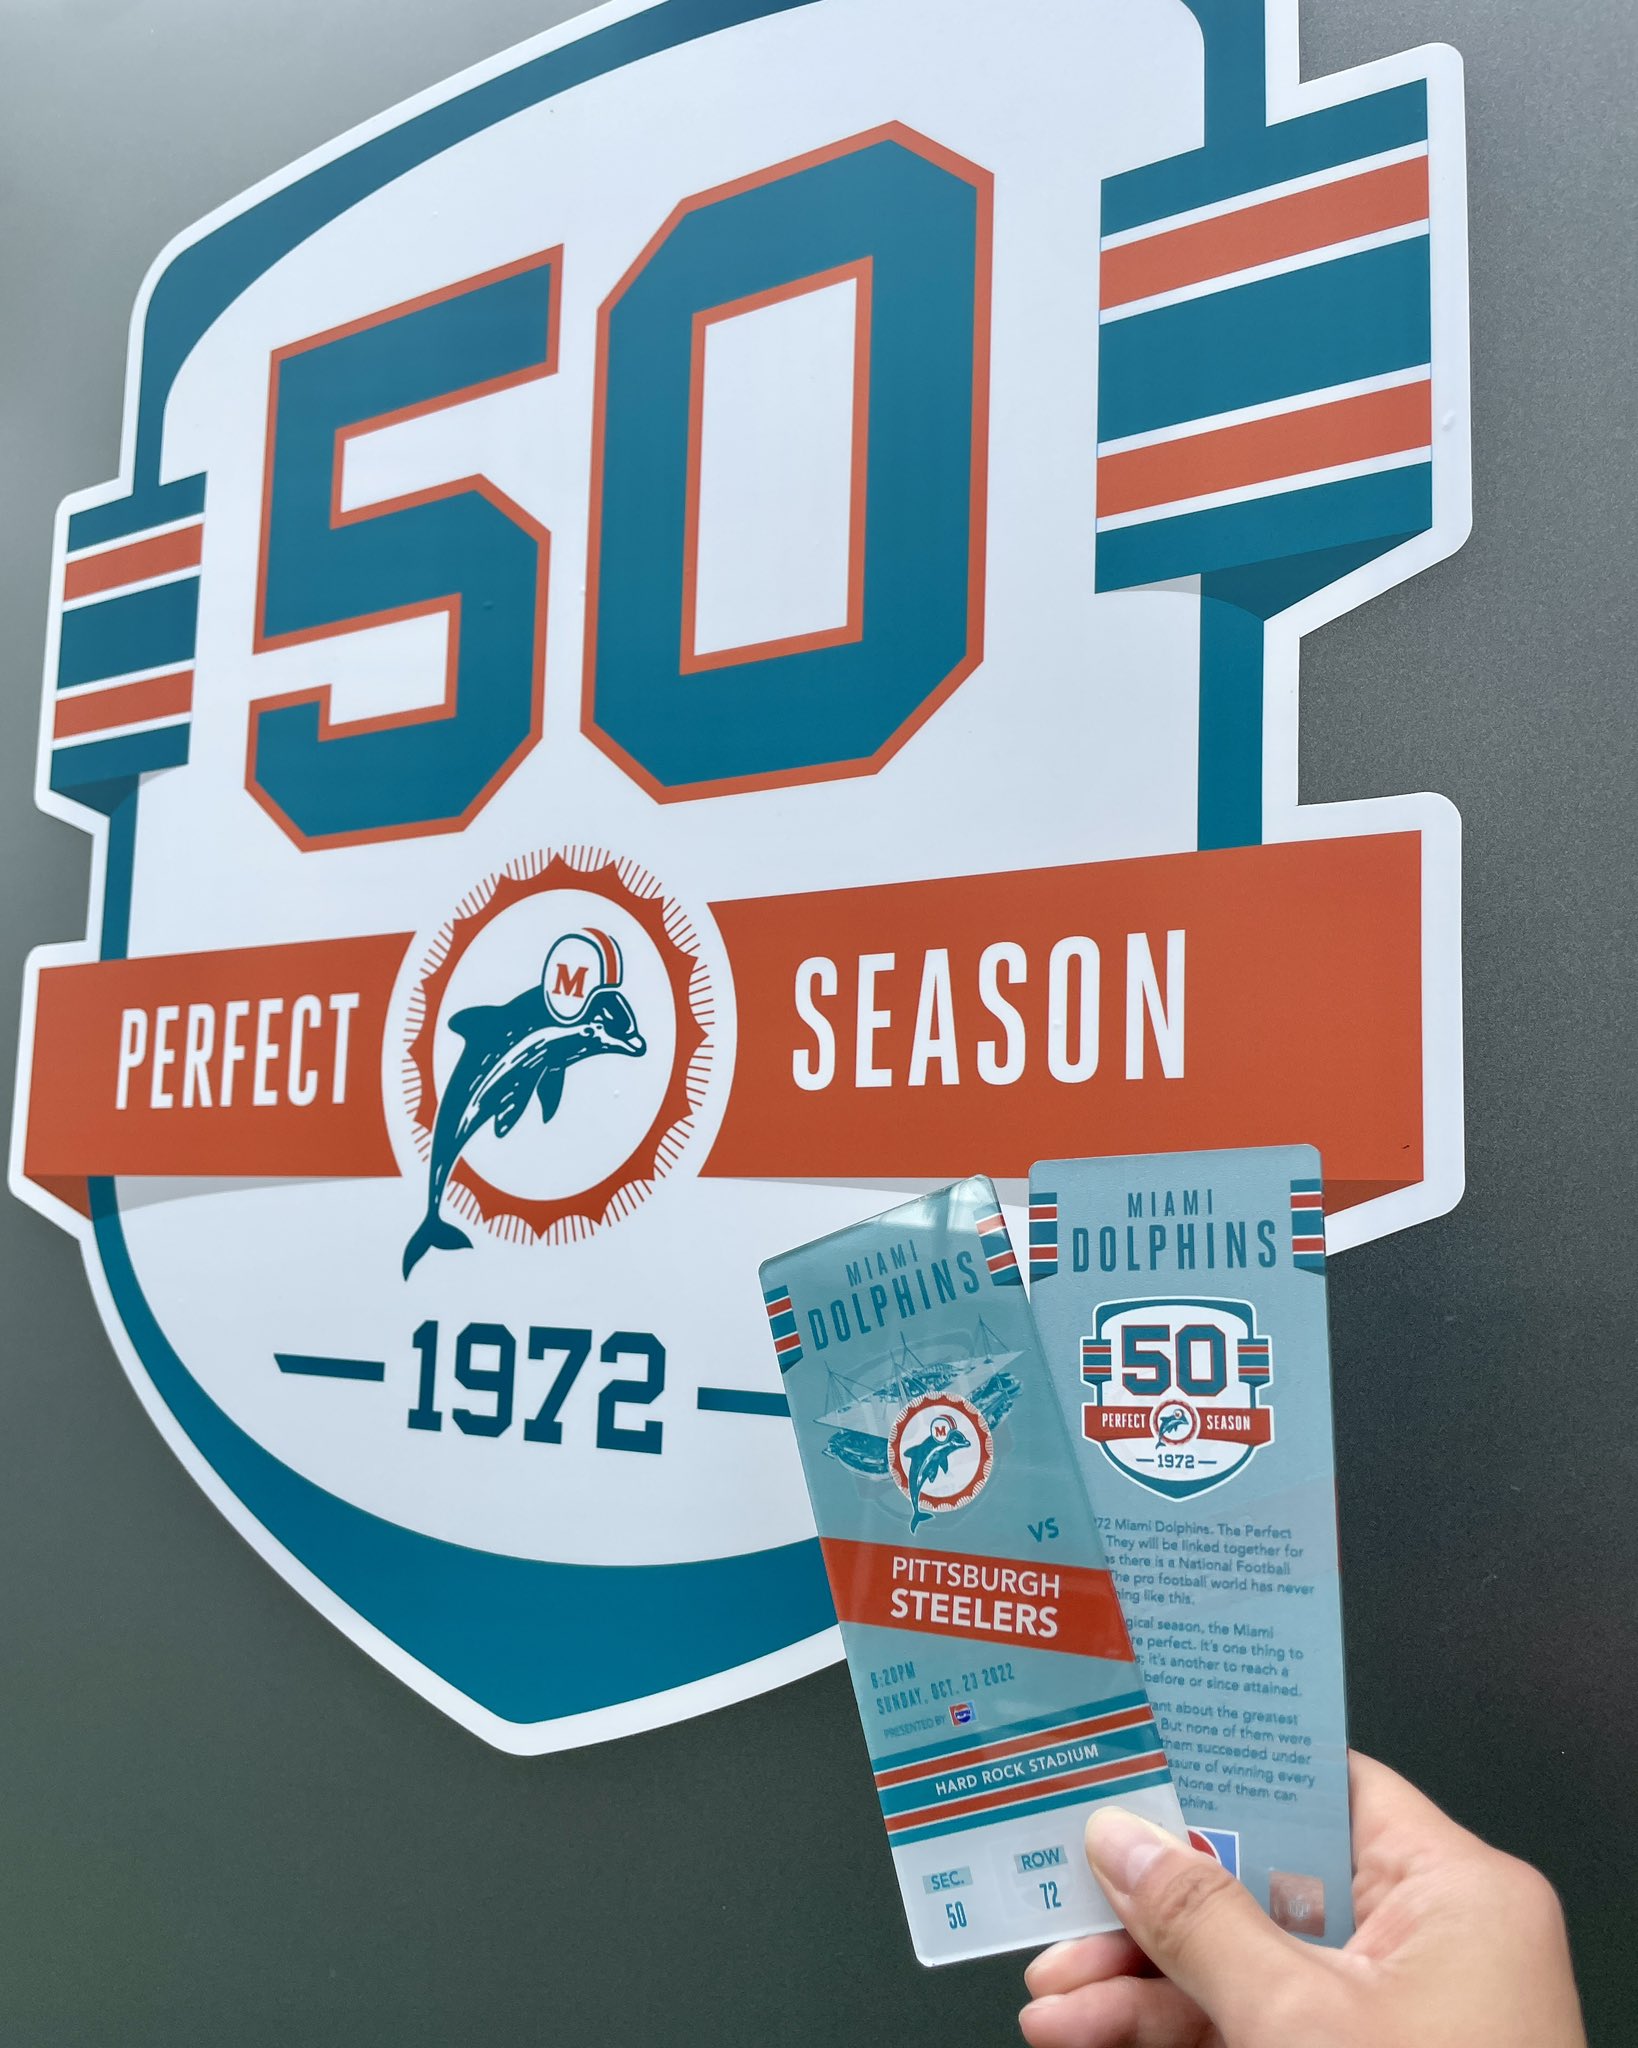 Hard Rock Stadium on X: 'Today's special @MiamiDolphins giveaway